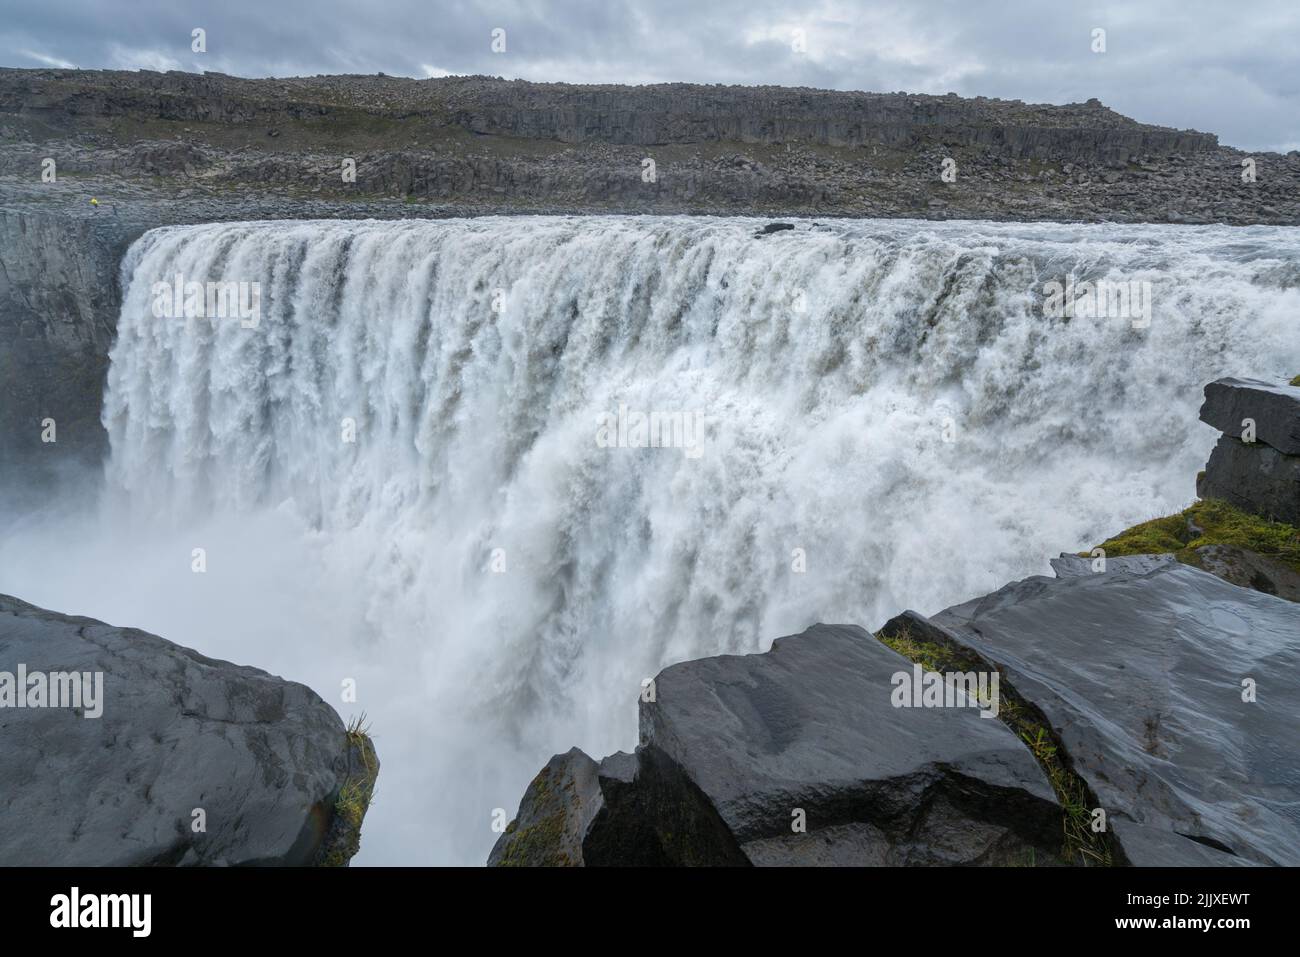 Biggest waterfall in Europe, Dettifoss. Muddy waters falling over the edge. Majestic Icelandic waterfall on a rainy, cloudy day. Stock Photo